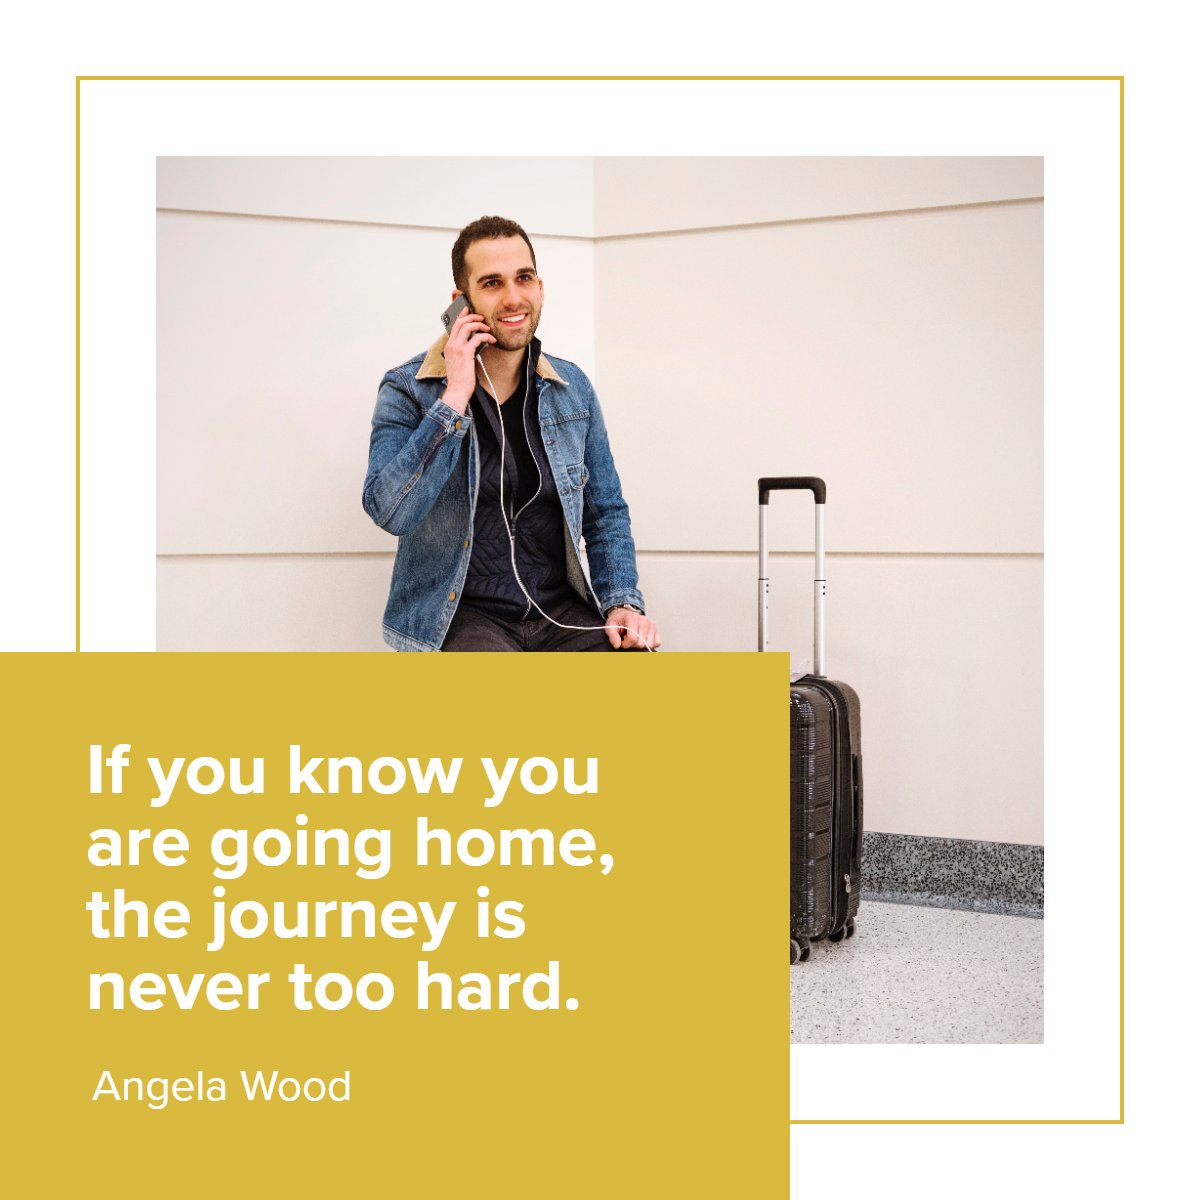 'If you know you are going home, the journey is never too hard.'  
― Angela Wood 📖

#homequotes #quoteoftheday #quotestagram #lifequotes #realestate #quotes 
 #Buyingahome #Sellingahome #Wisconsinrealestate